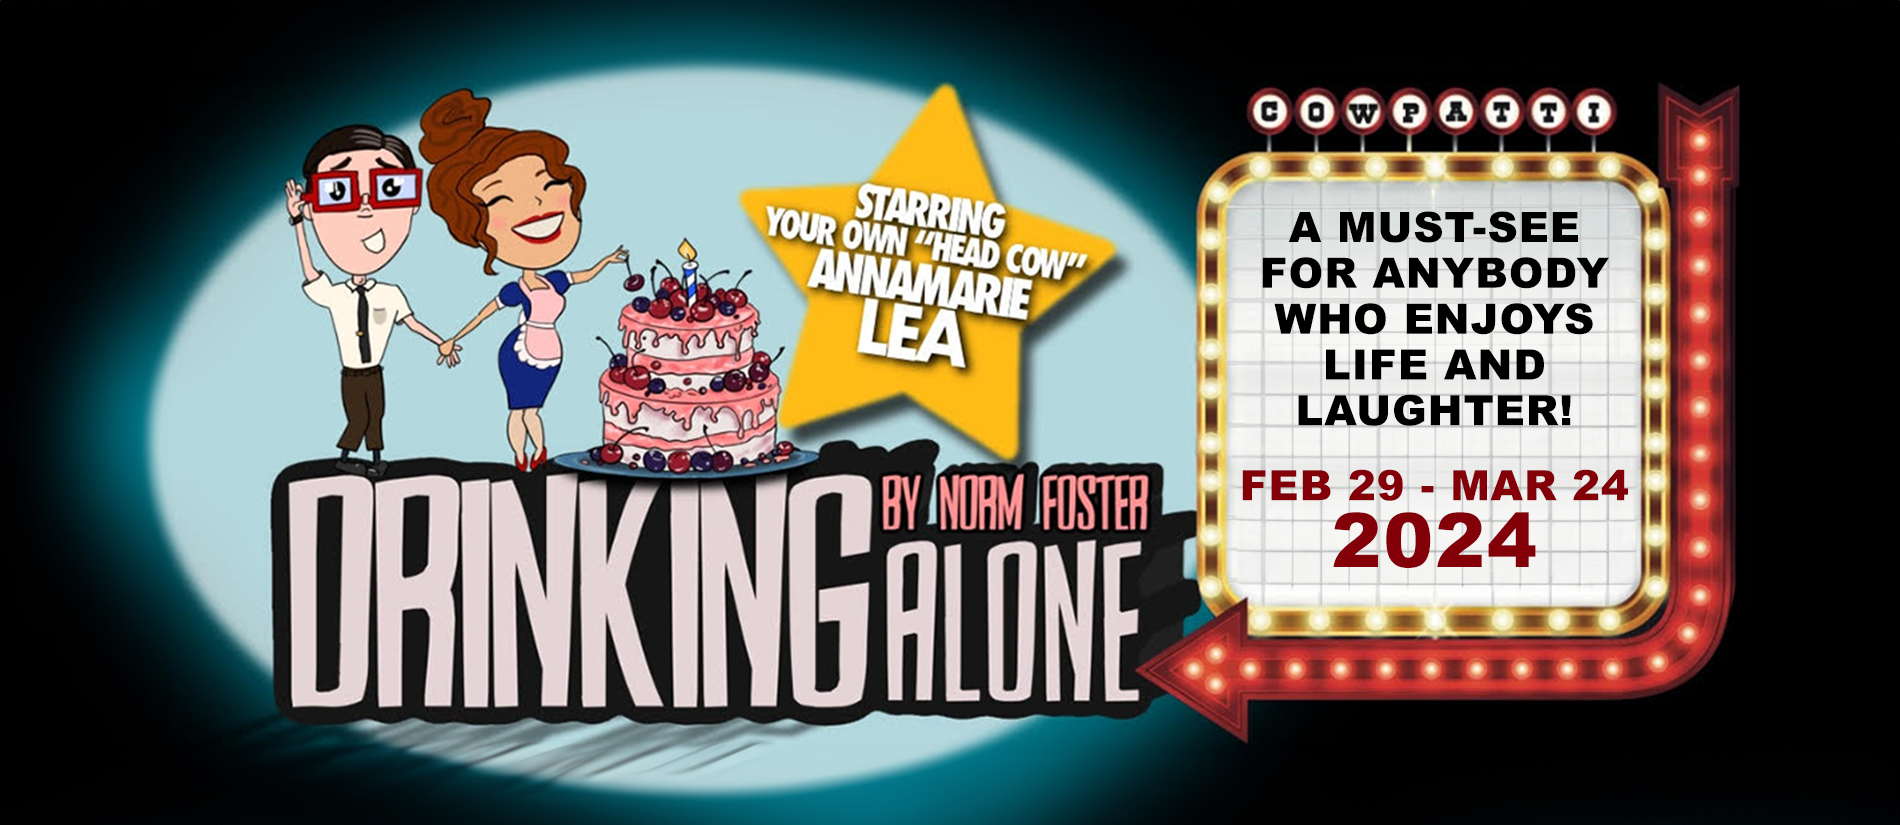 Drinking Alone by Norm Foster, Feb 29 to Mar 24, 2024 at Cow Patti Theatre.